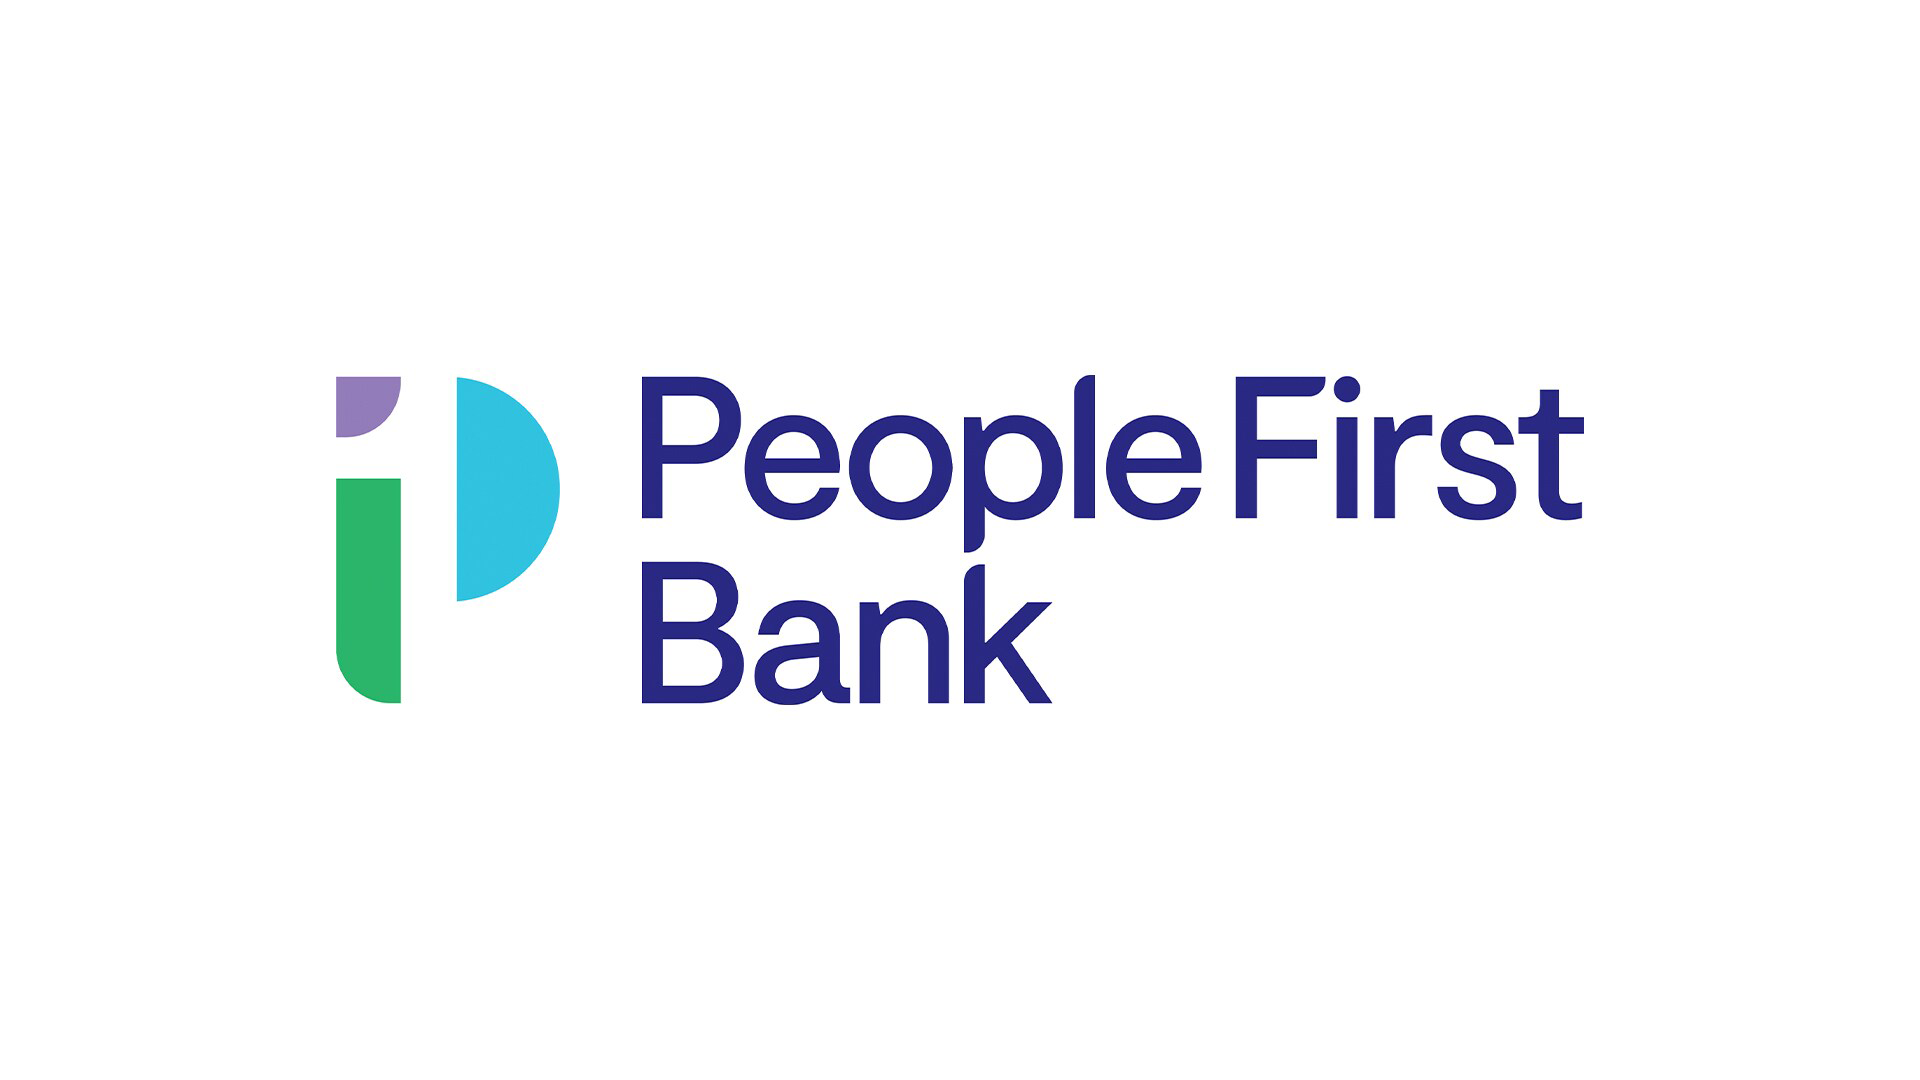 People First Bank